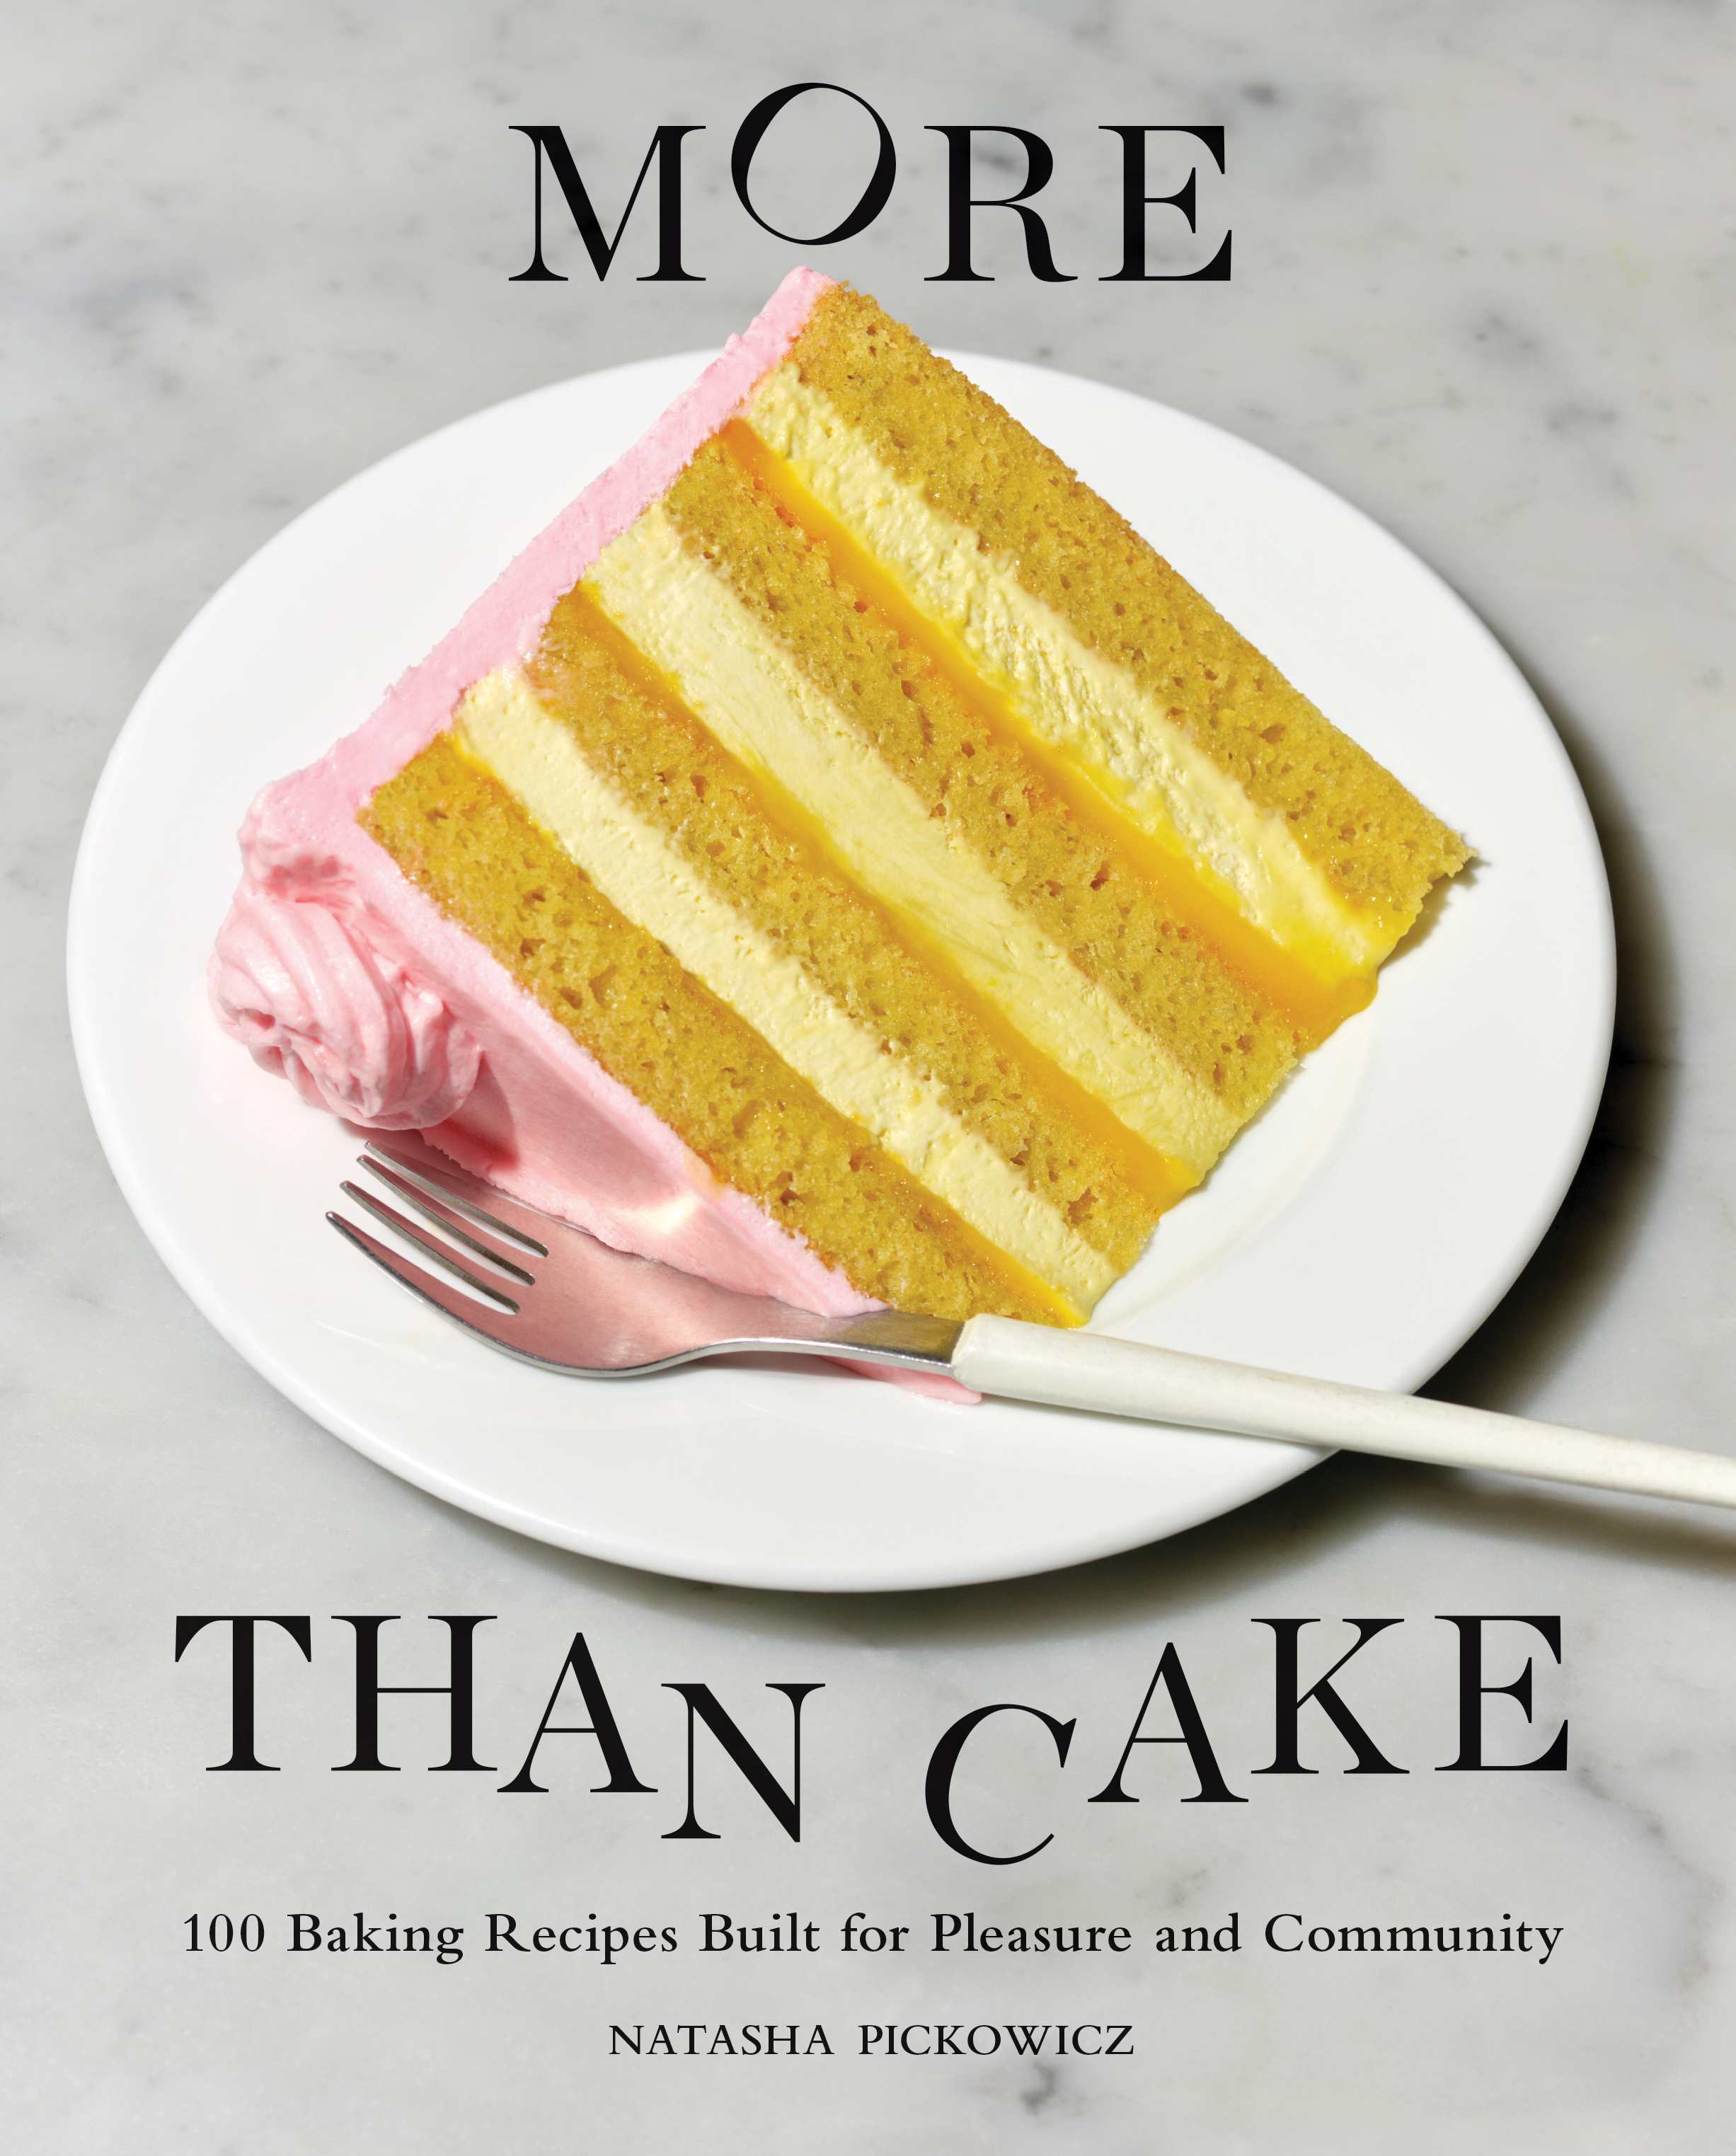 A book cover for the cookbook More Than Cake